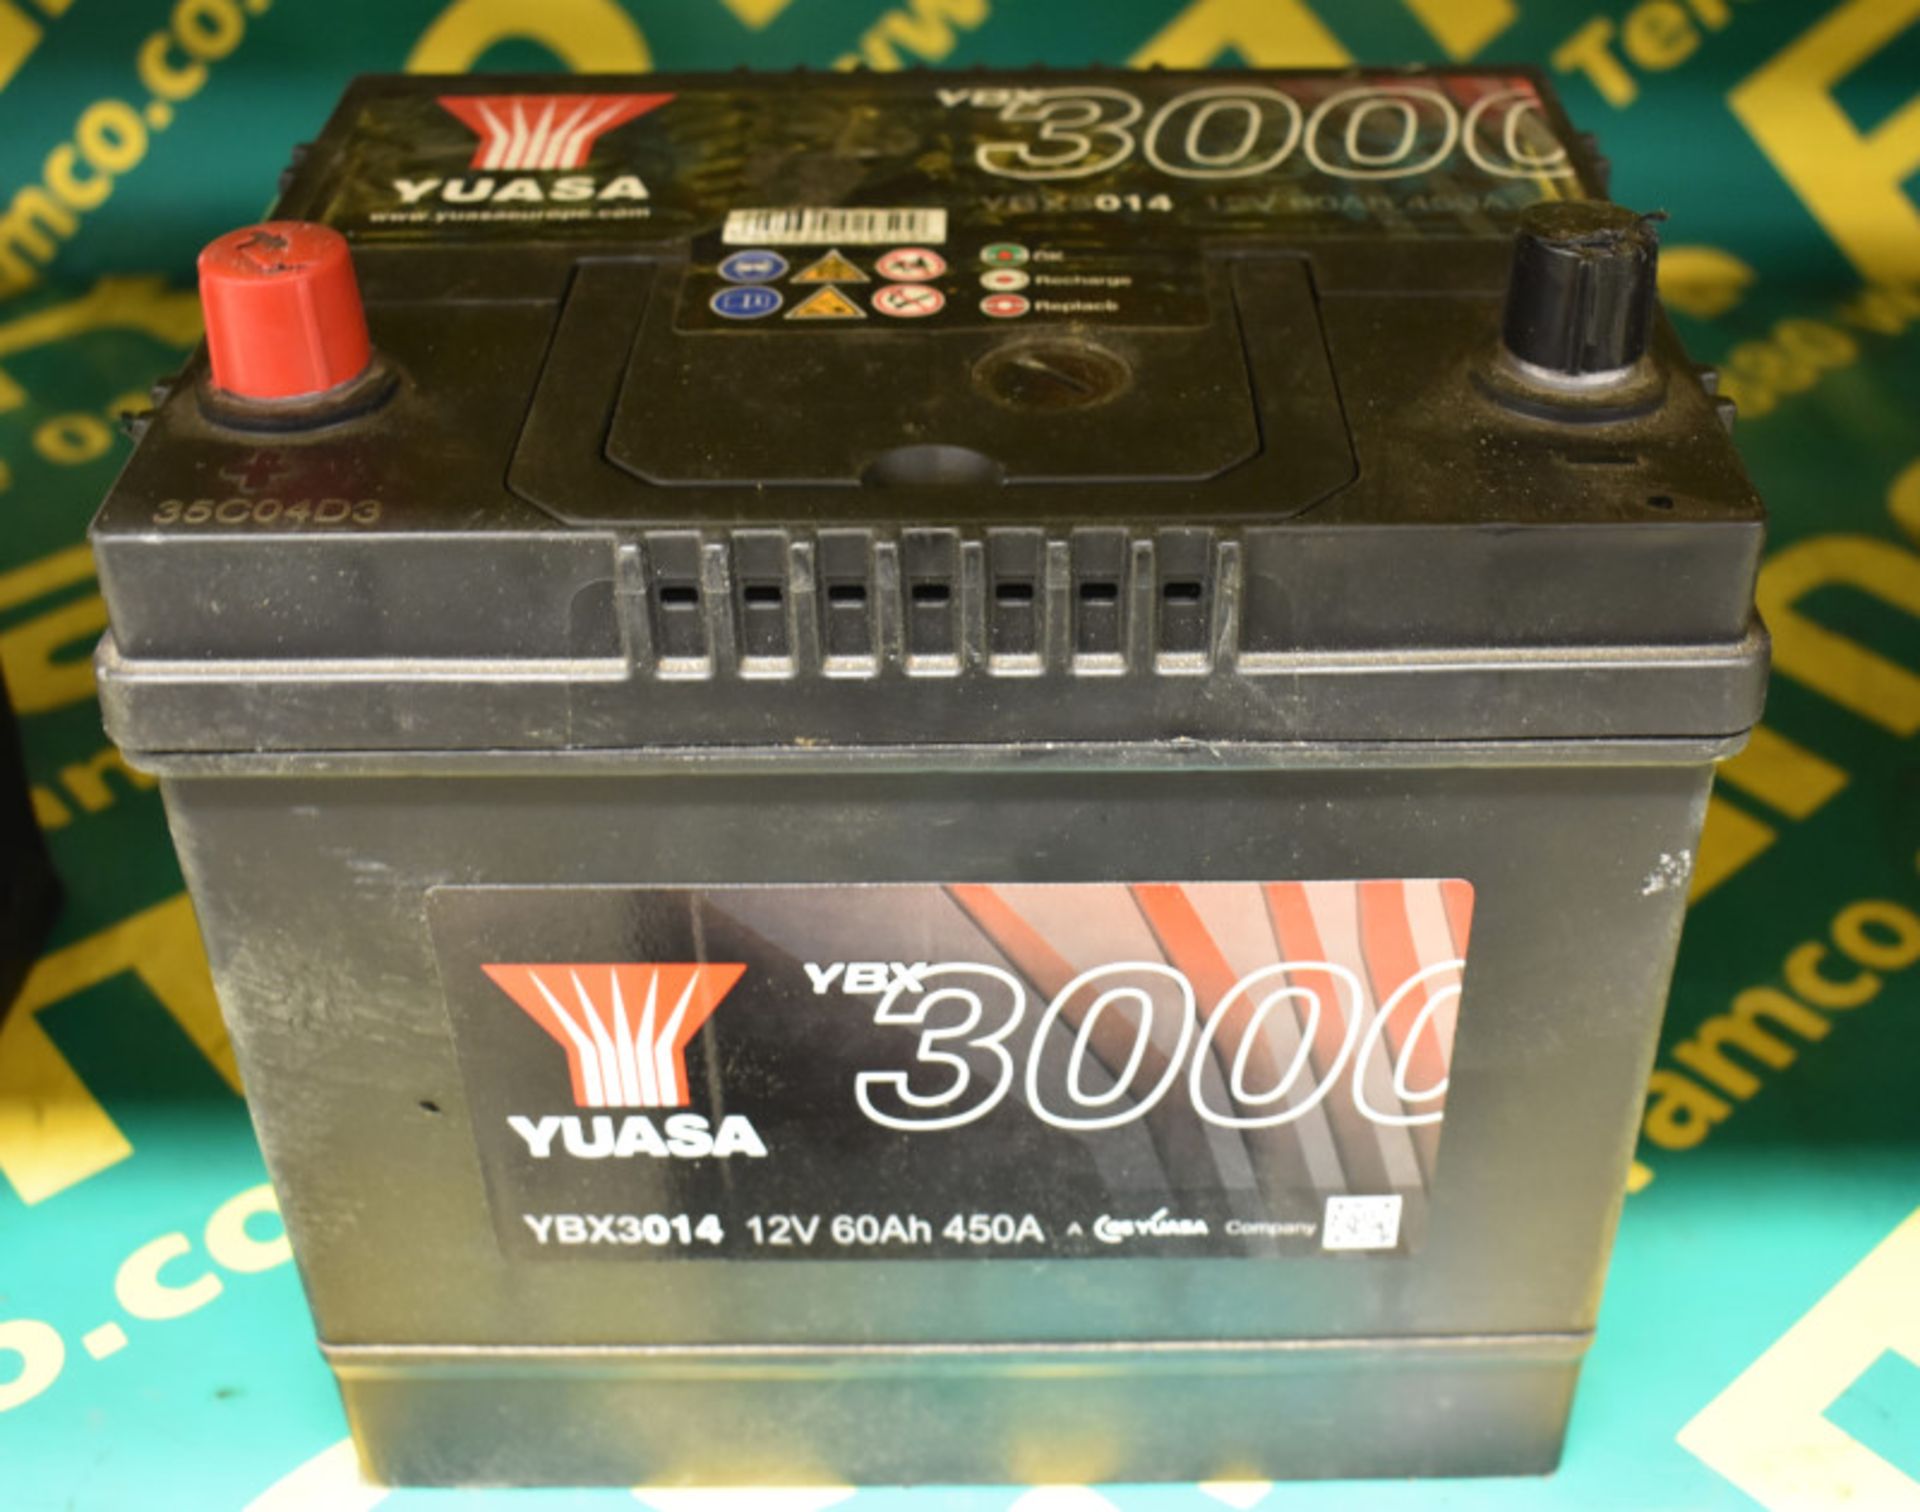 Yuasa YBX3027 12v 60Ah 550A, Yuasa YBX3014 12v 60Ah 450A & Yuasa YBX1012 12v 45Ah 380A Batteries - Image 3 of 4